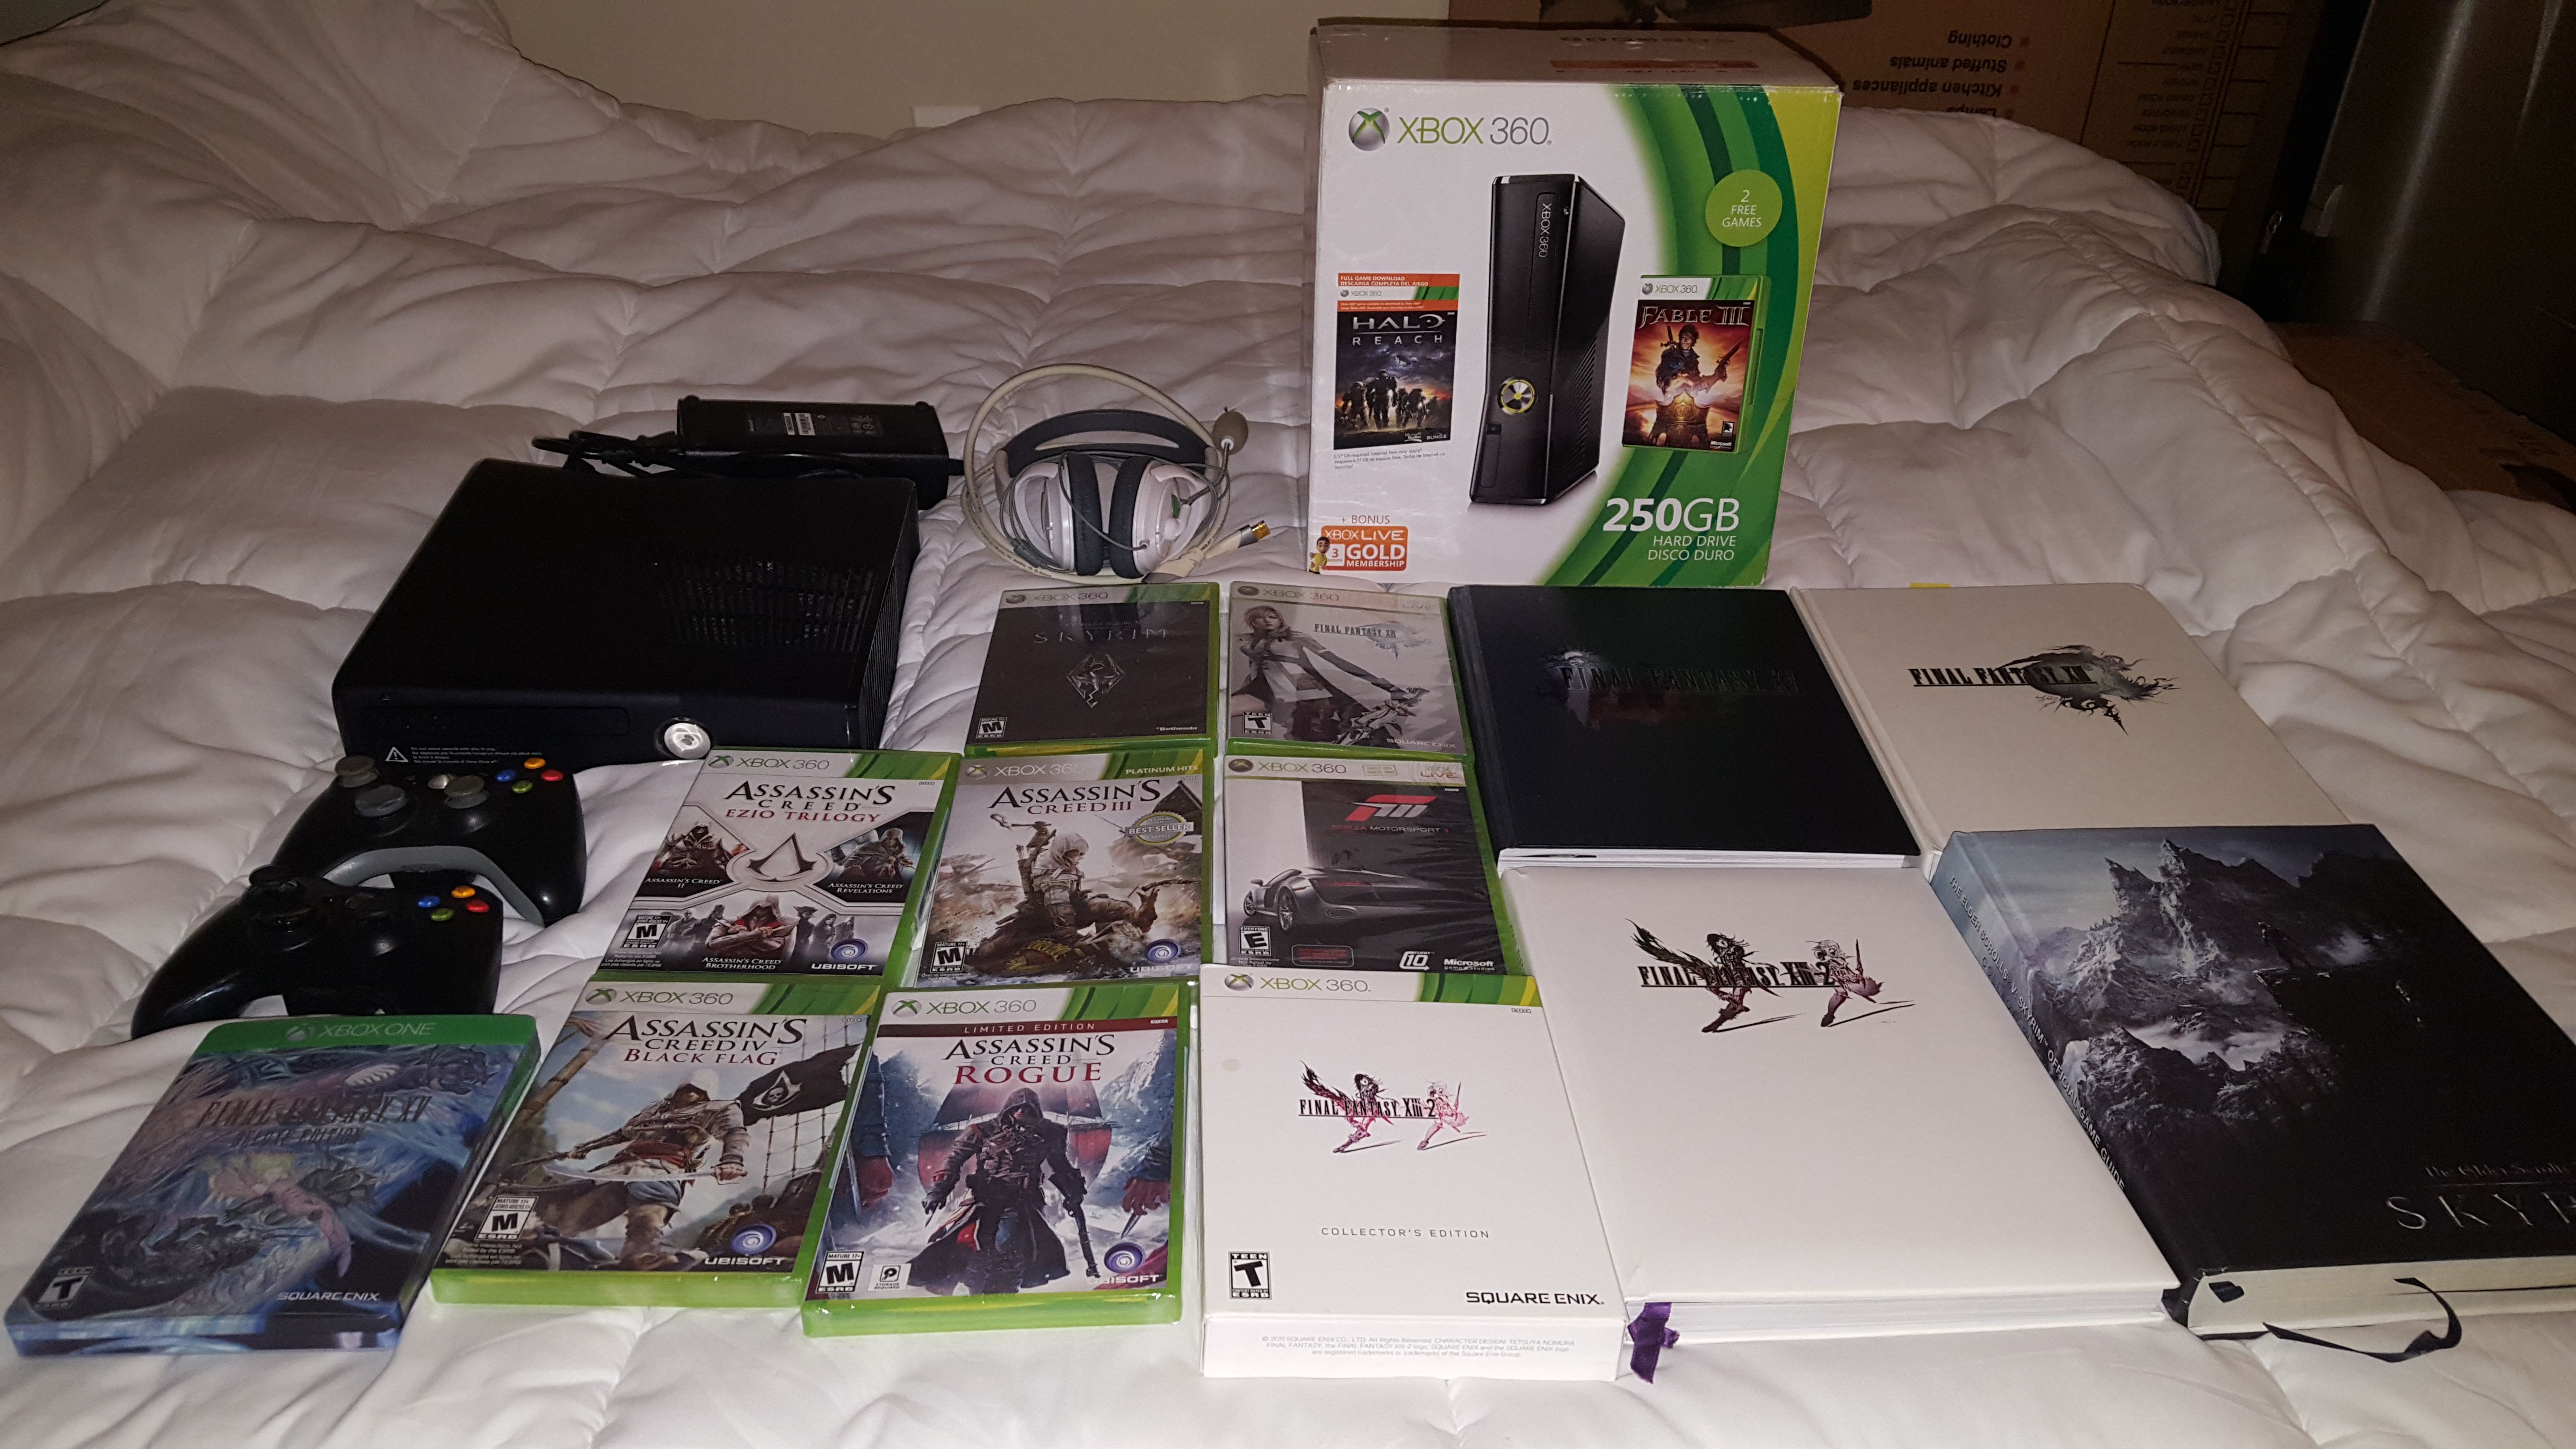 Bkack Xbox 360 250GB + 2 controllers + 9 games + 4 guidebooks